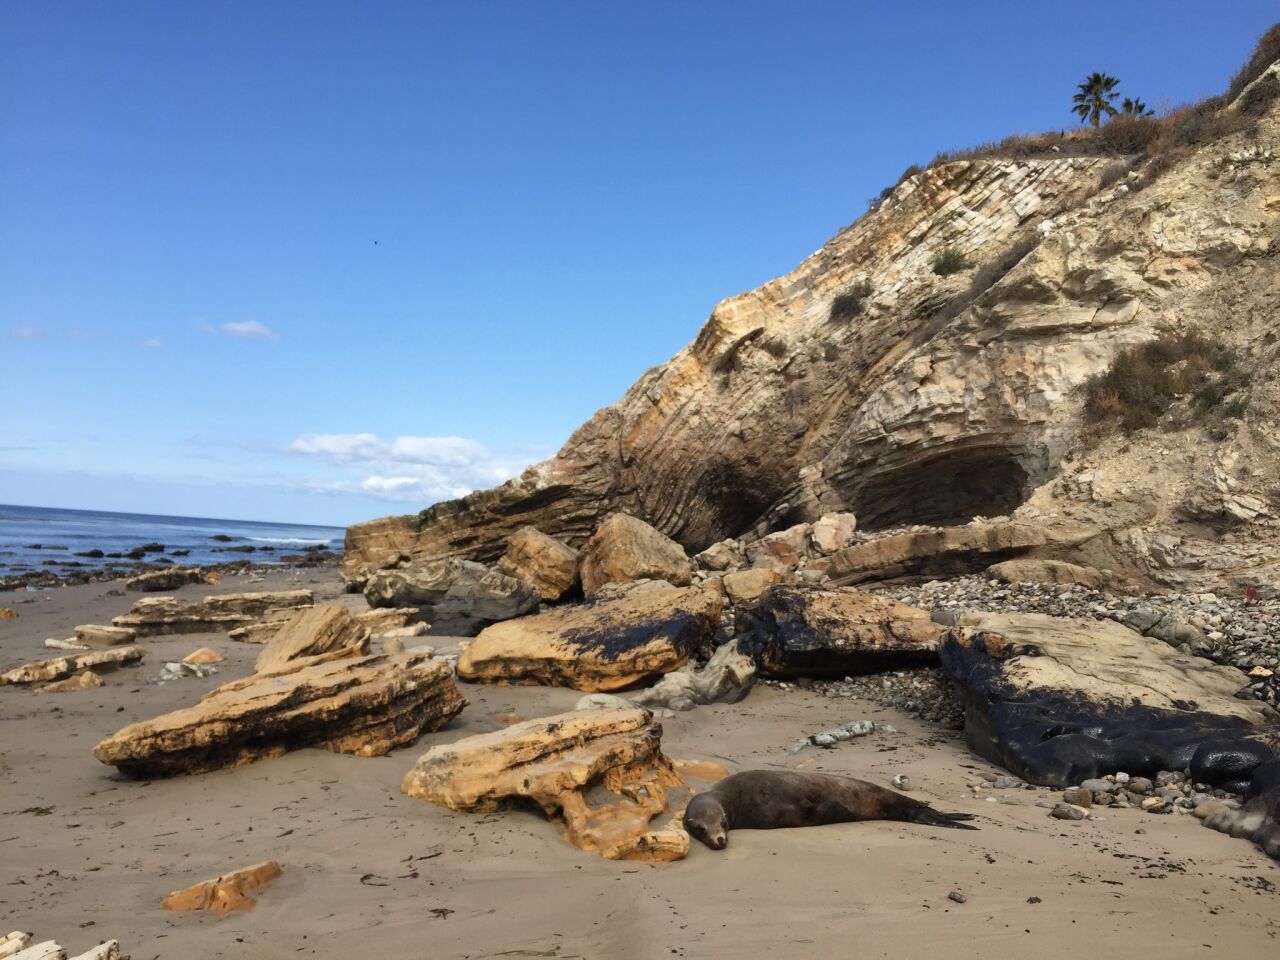 A sea lion covered in oil lies on the beach near Refugio State Beach, about 100 feet from where the oil spill flowed into the ocean off the Santa Barbara County coast.